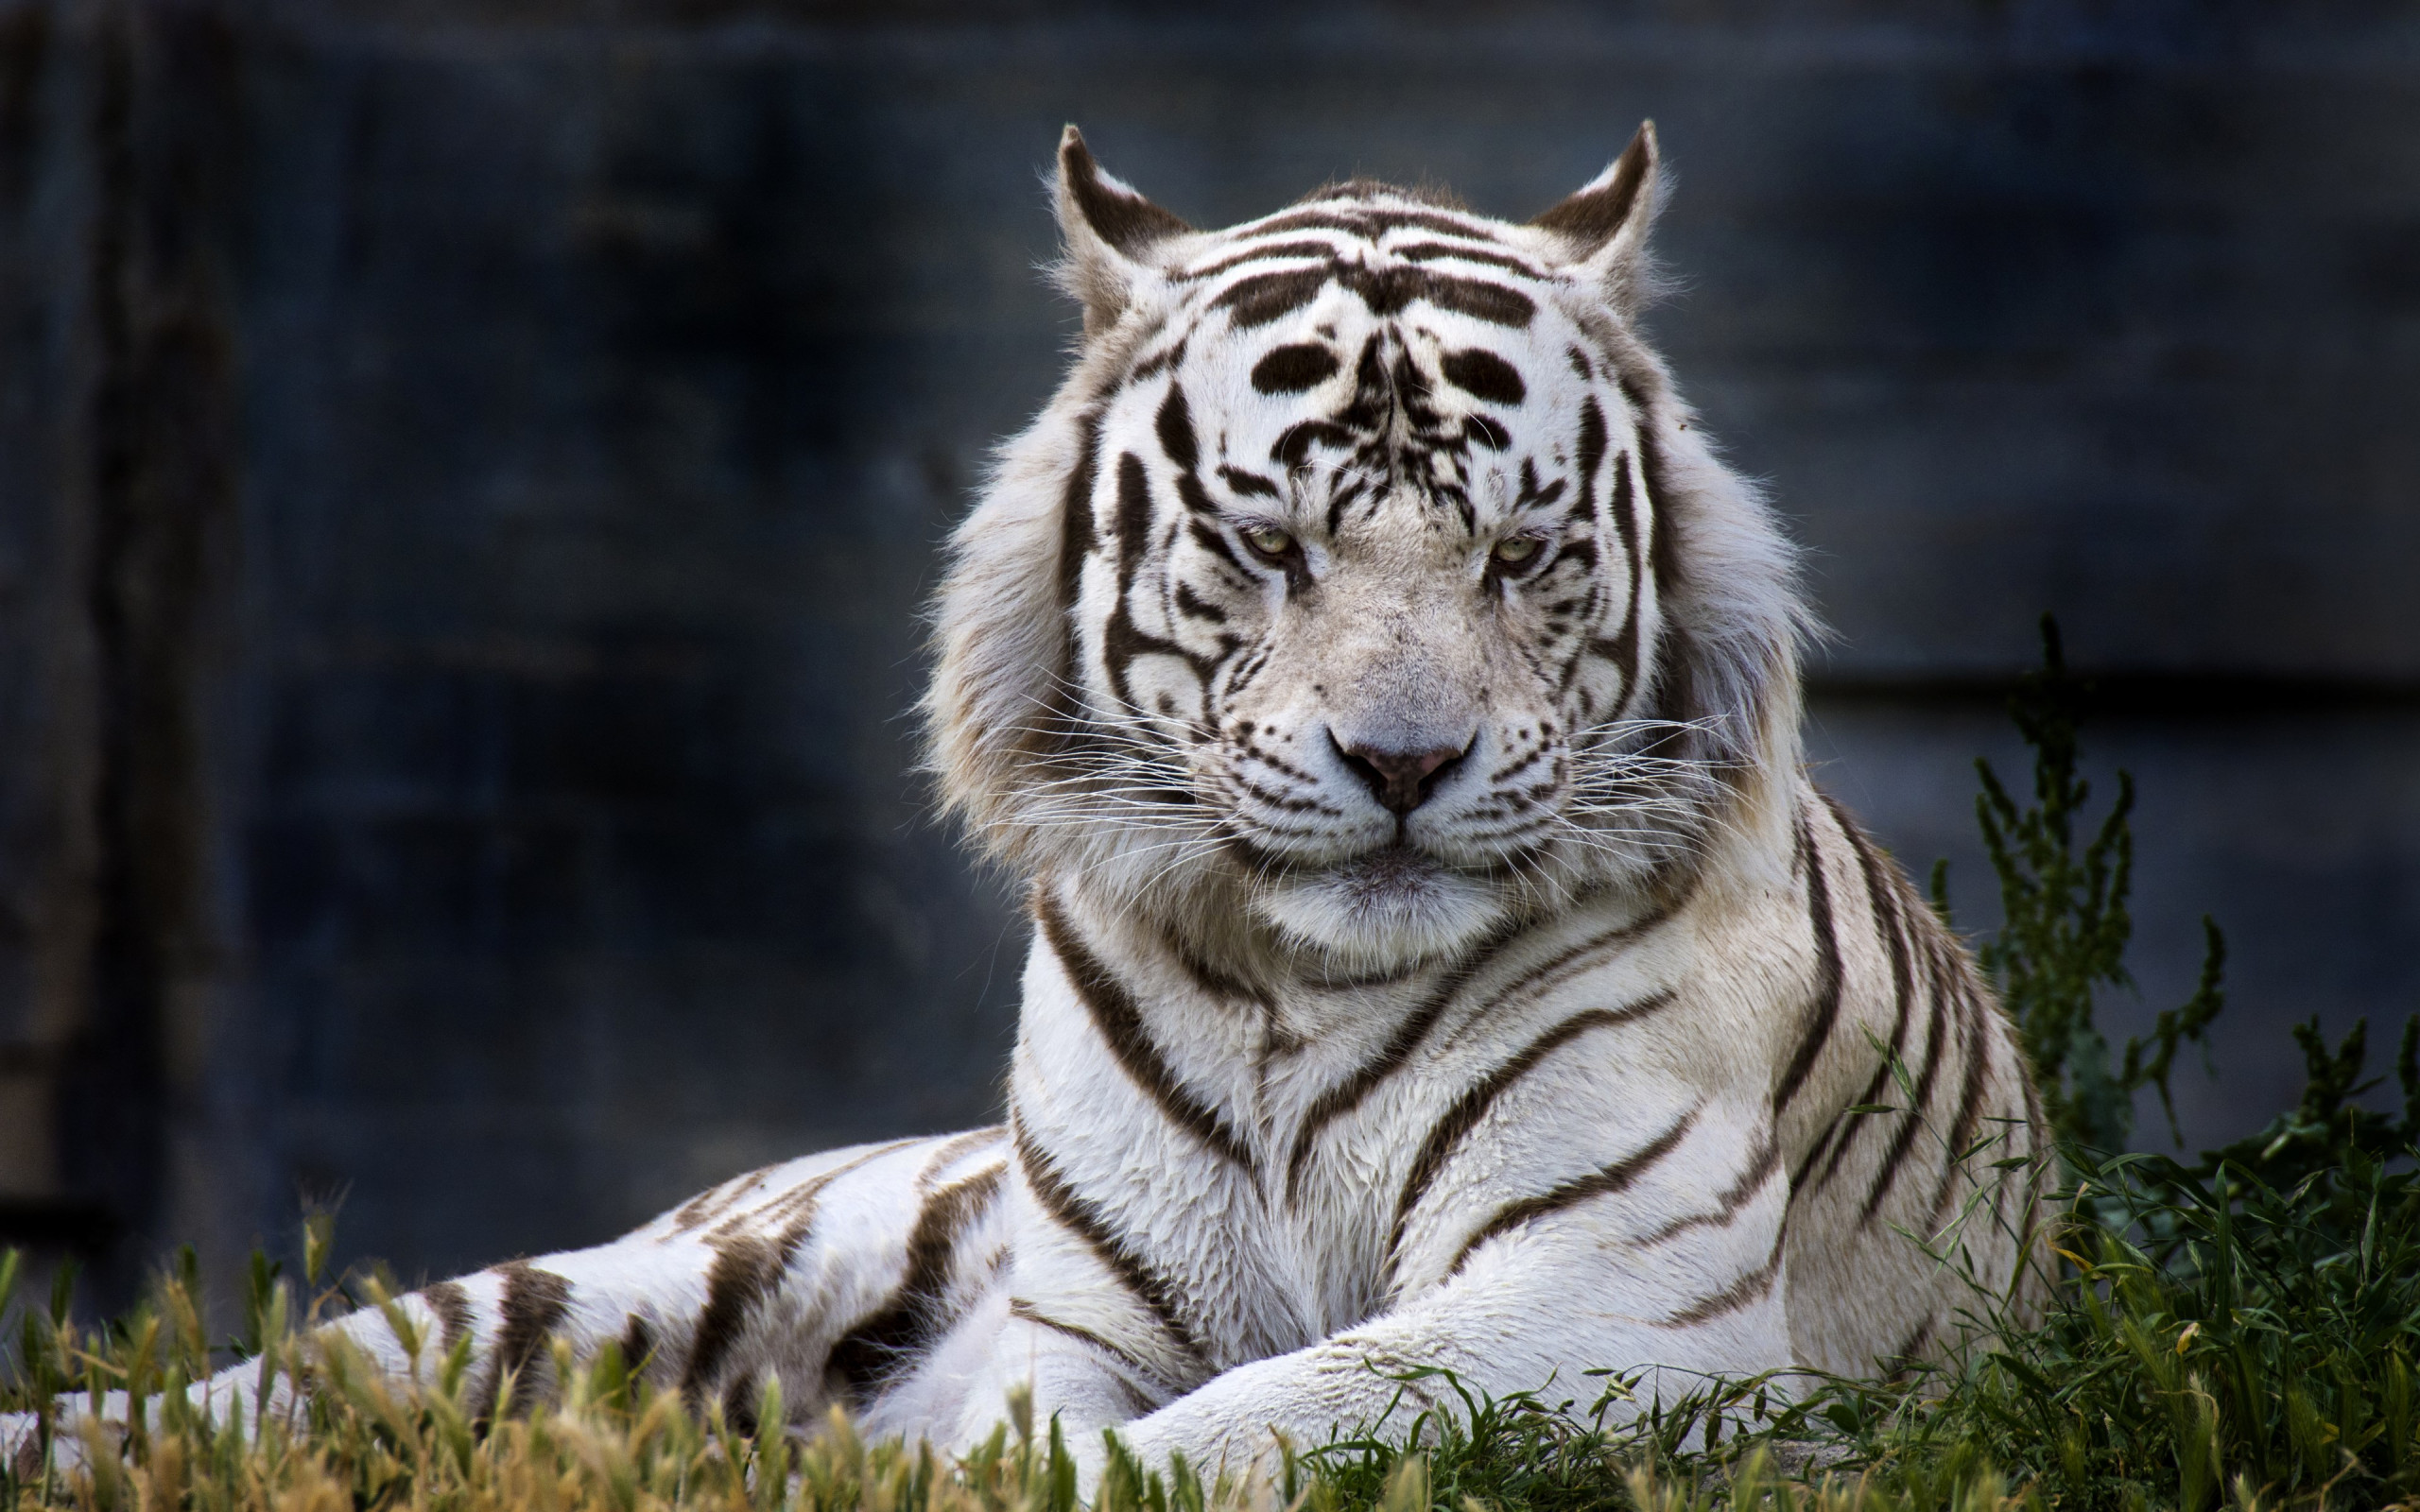 The white tiger from Madrid Zoo wallpaper 2560x1600